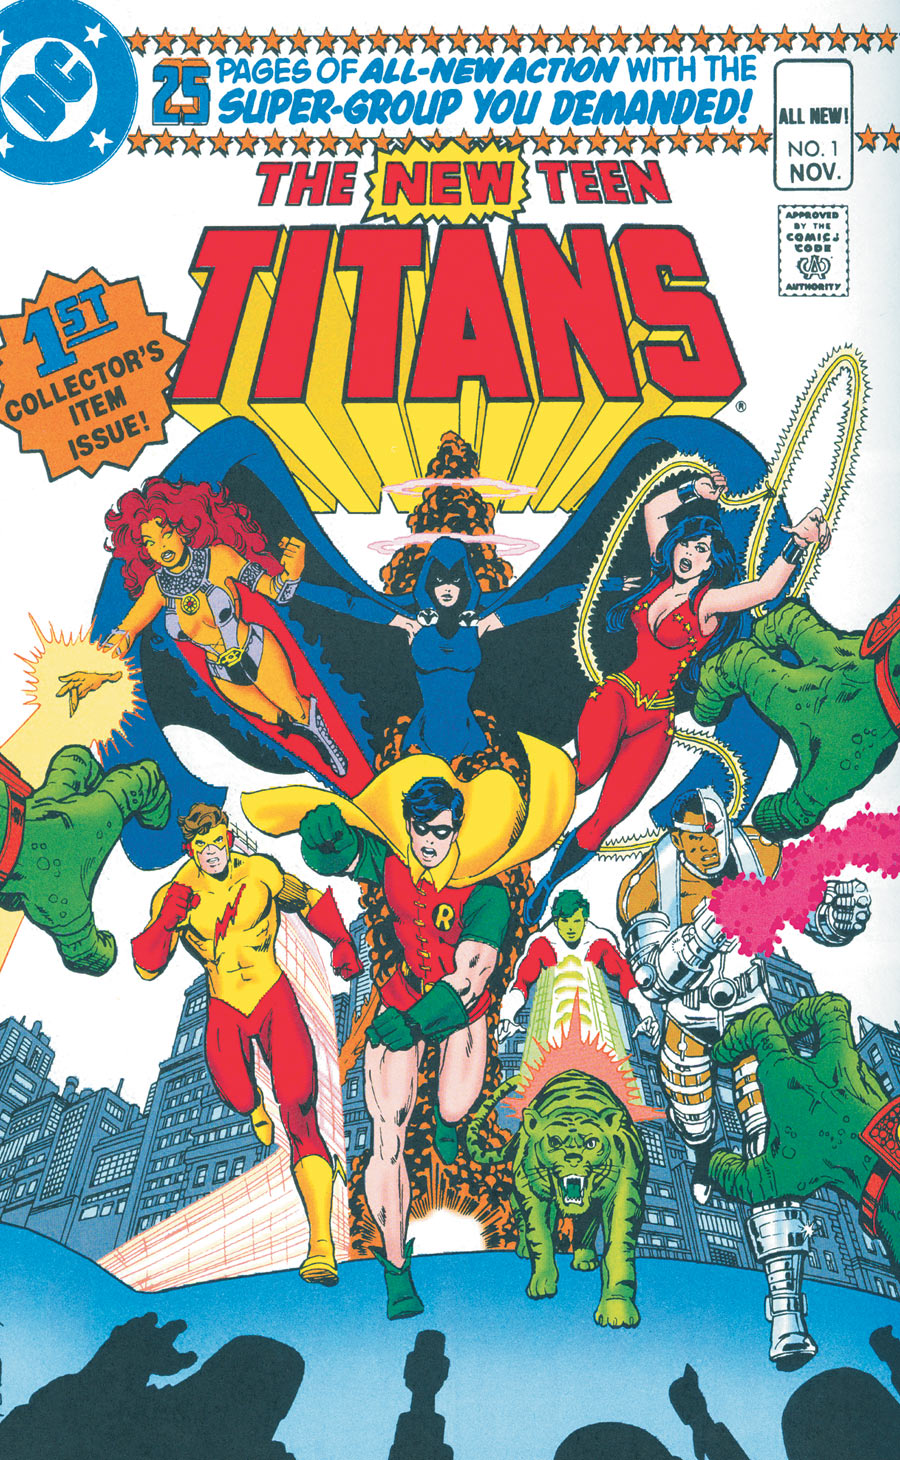 The New Teen Titans Omnibus Vol. 1 Marv Wolfman and George Perez